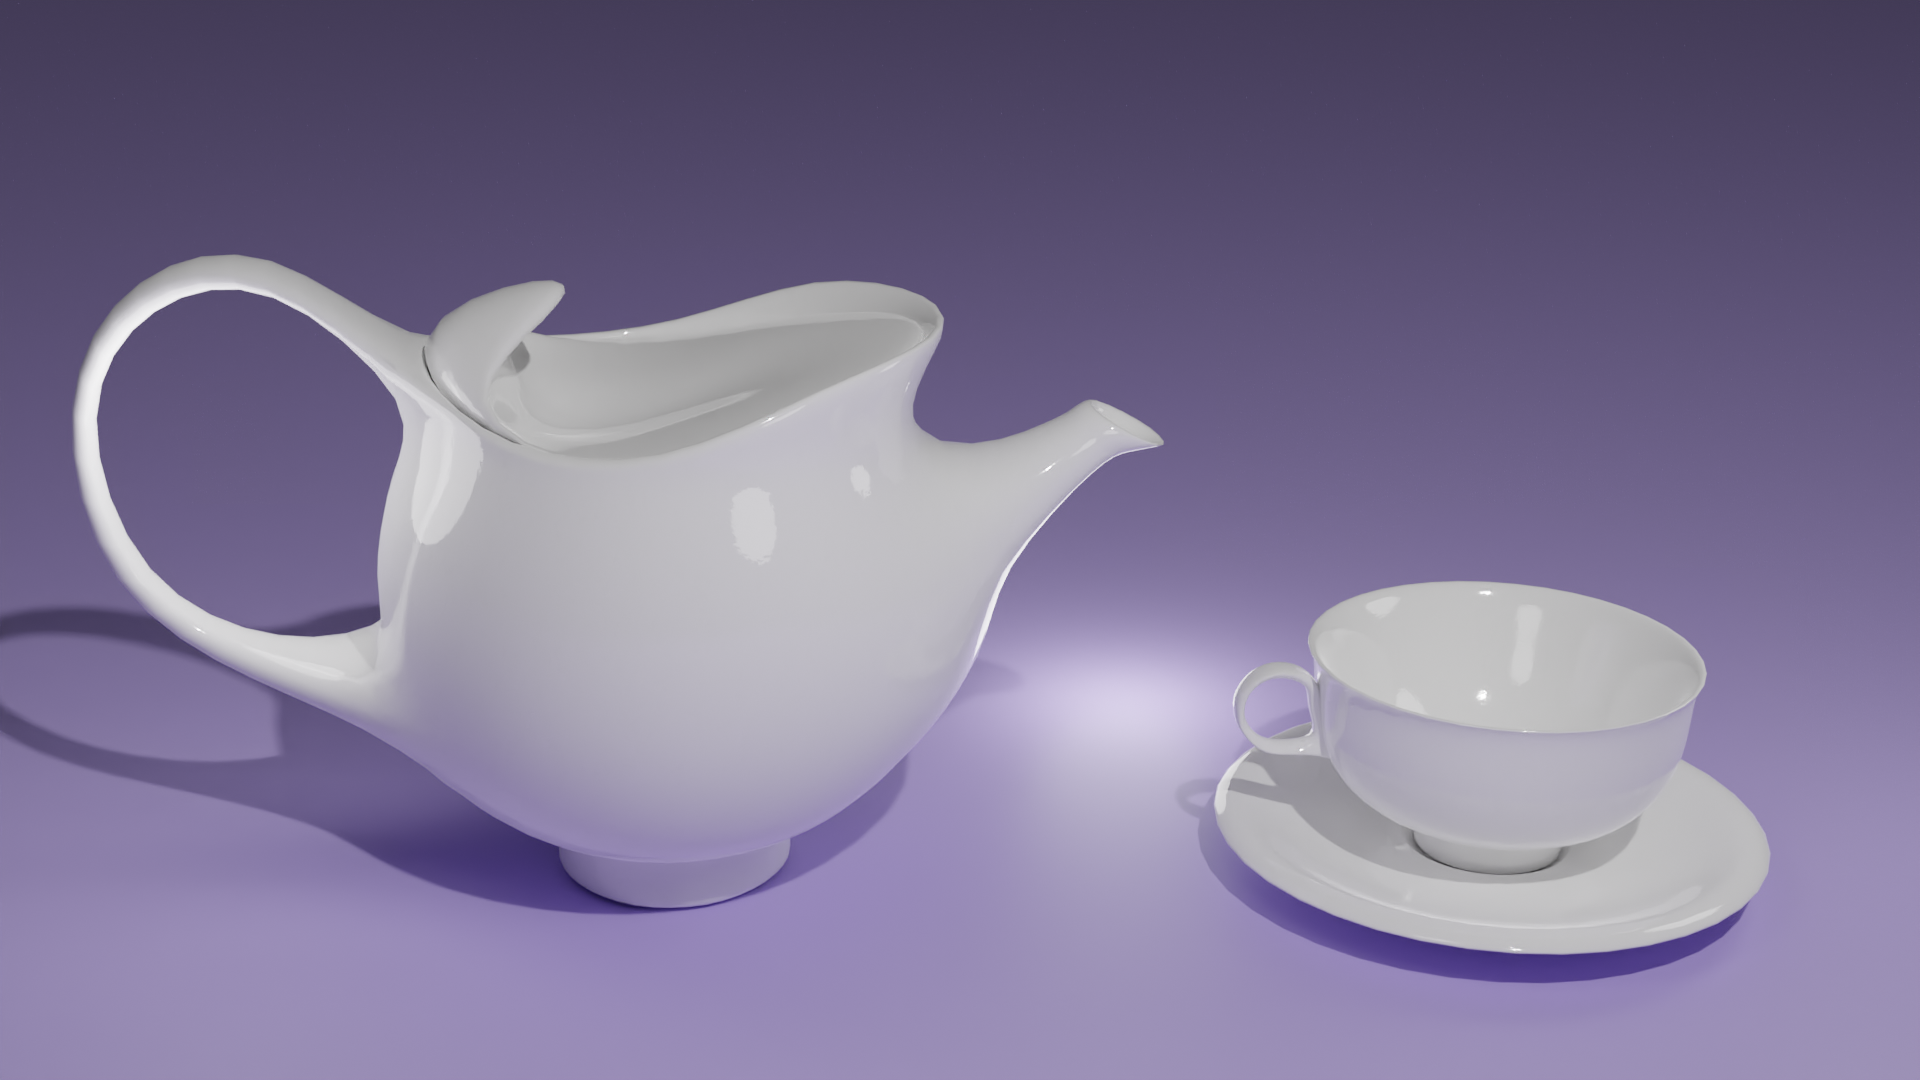 3D rendering of white ceramic teapot and teacup with saucer.